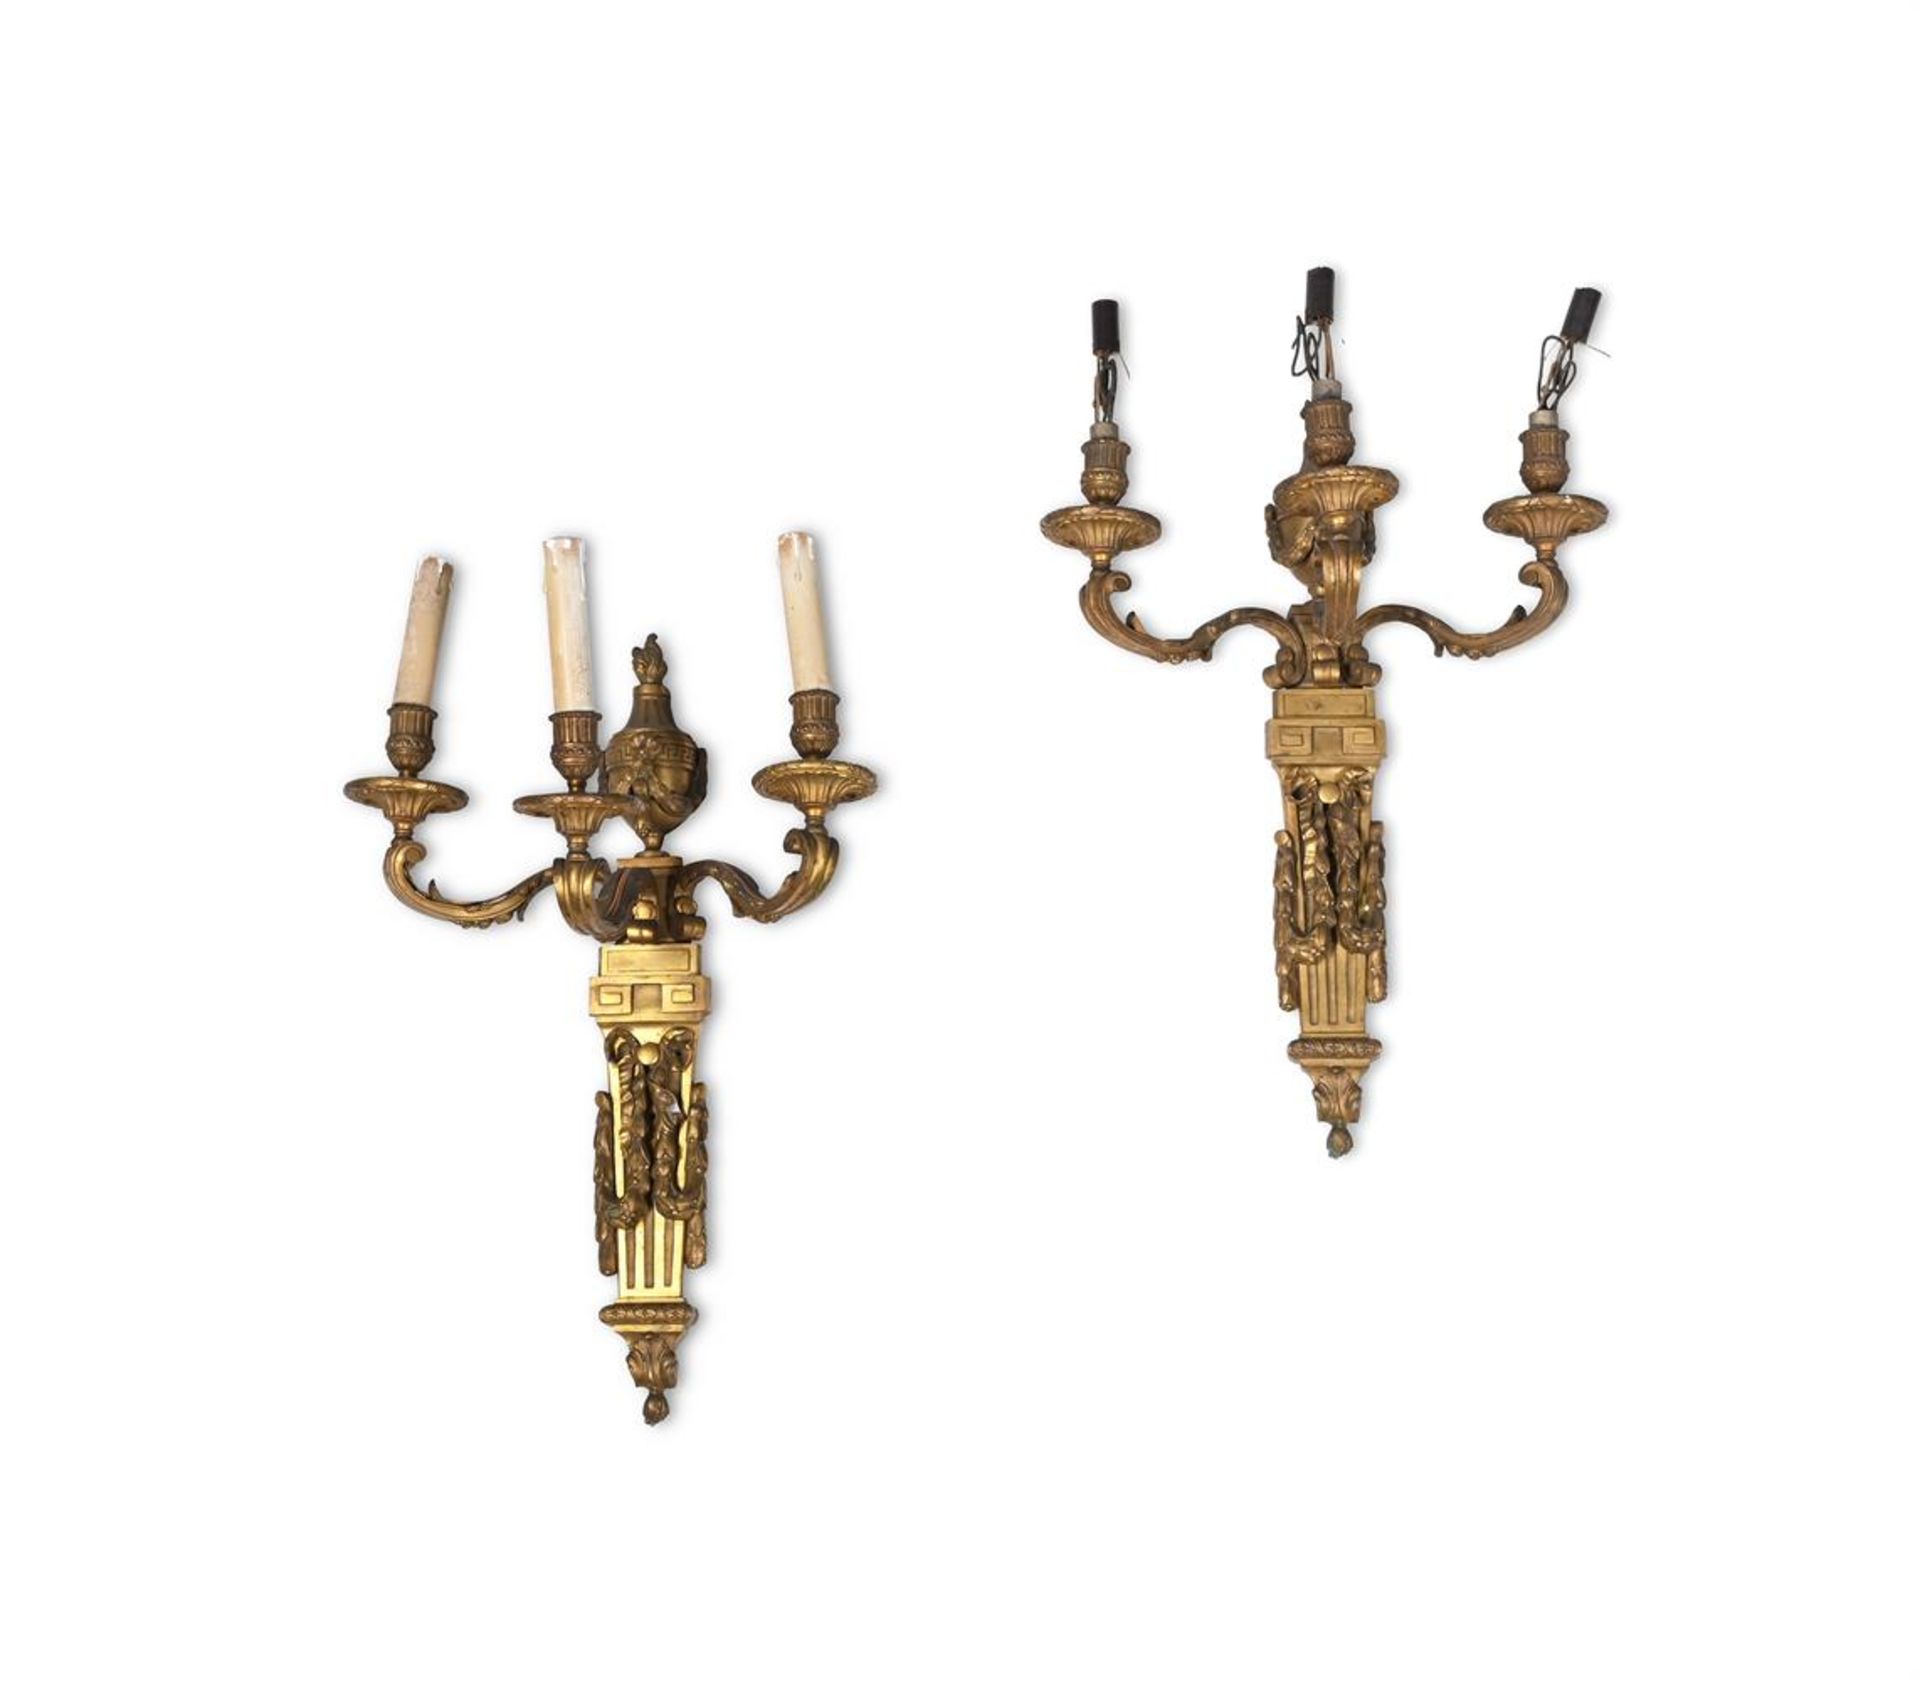 A PAIR OF FRENCH GILT BRONZE THREE BRANCH WALL LIGHTS, LATE 19TH CENTURY